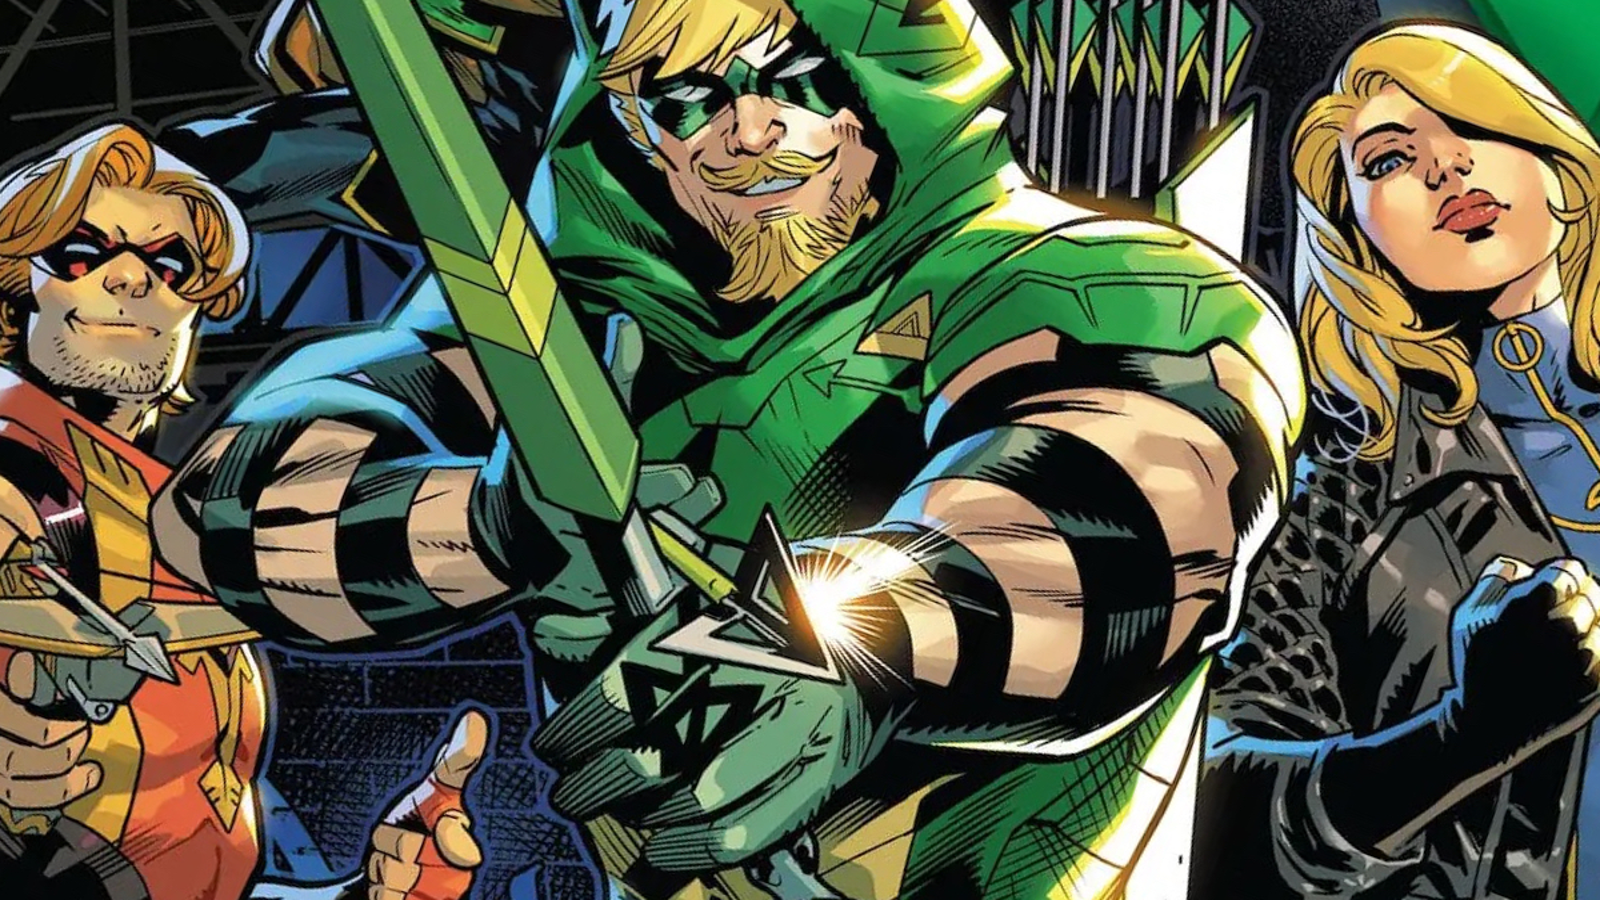 DC's doubles down on Green Arrow as first issue hits stands